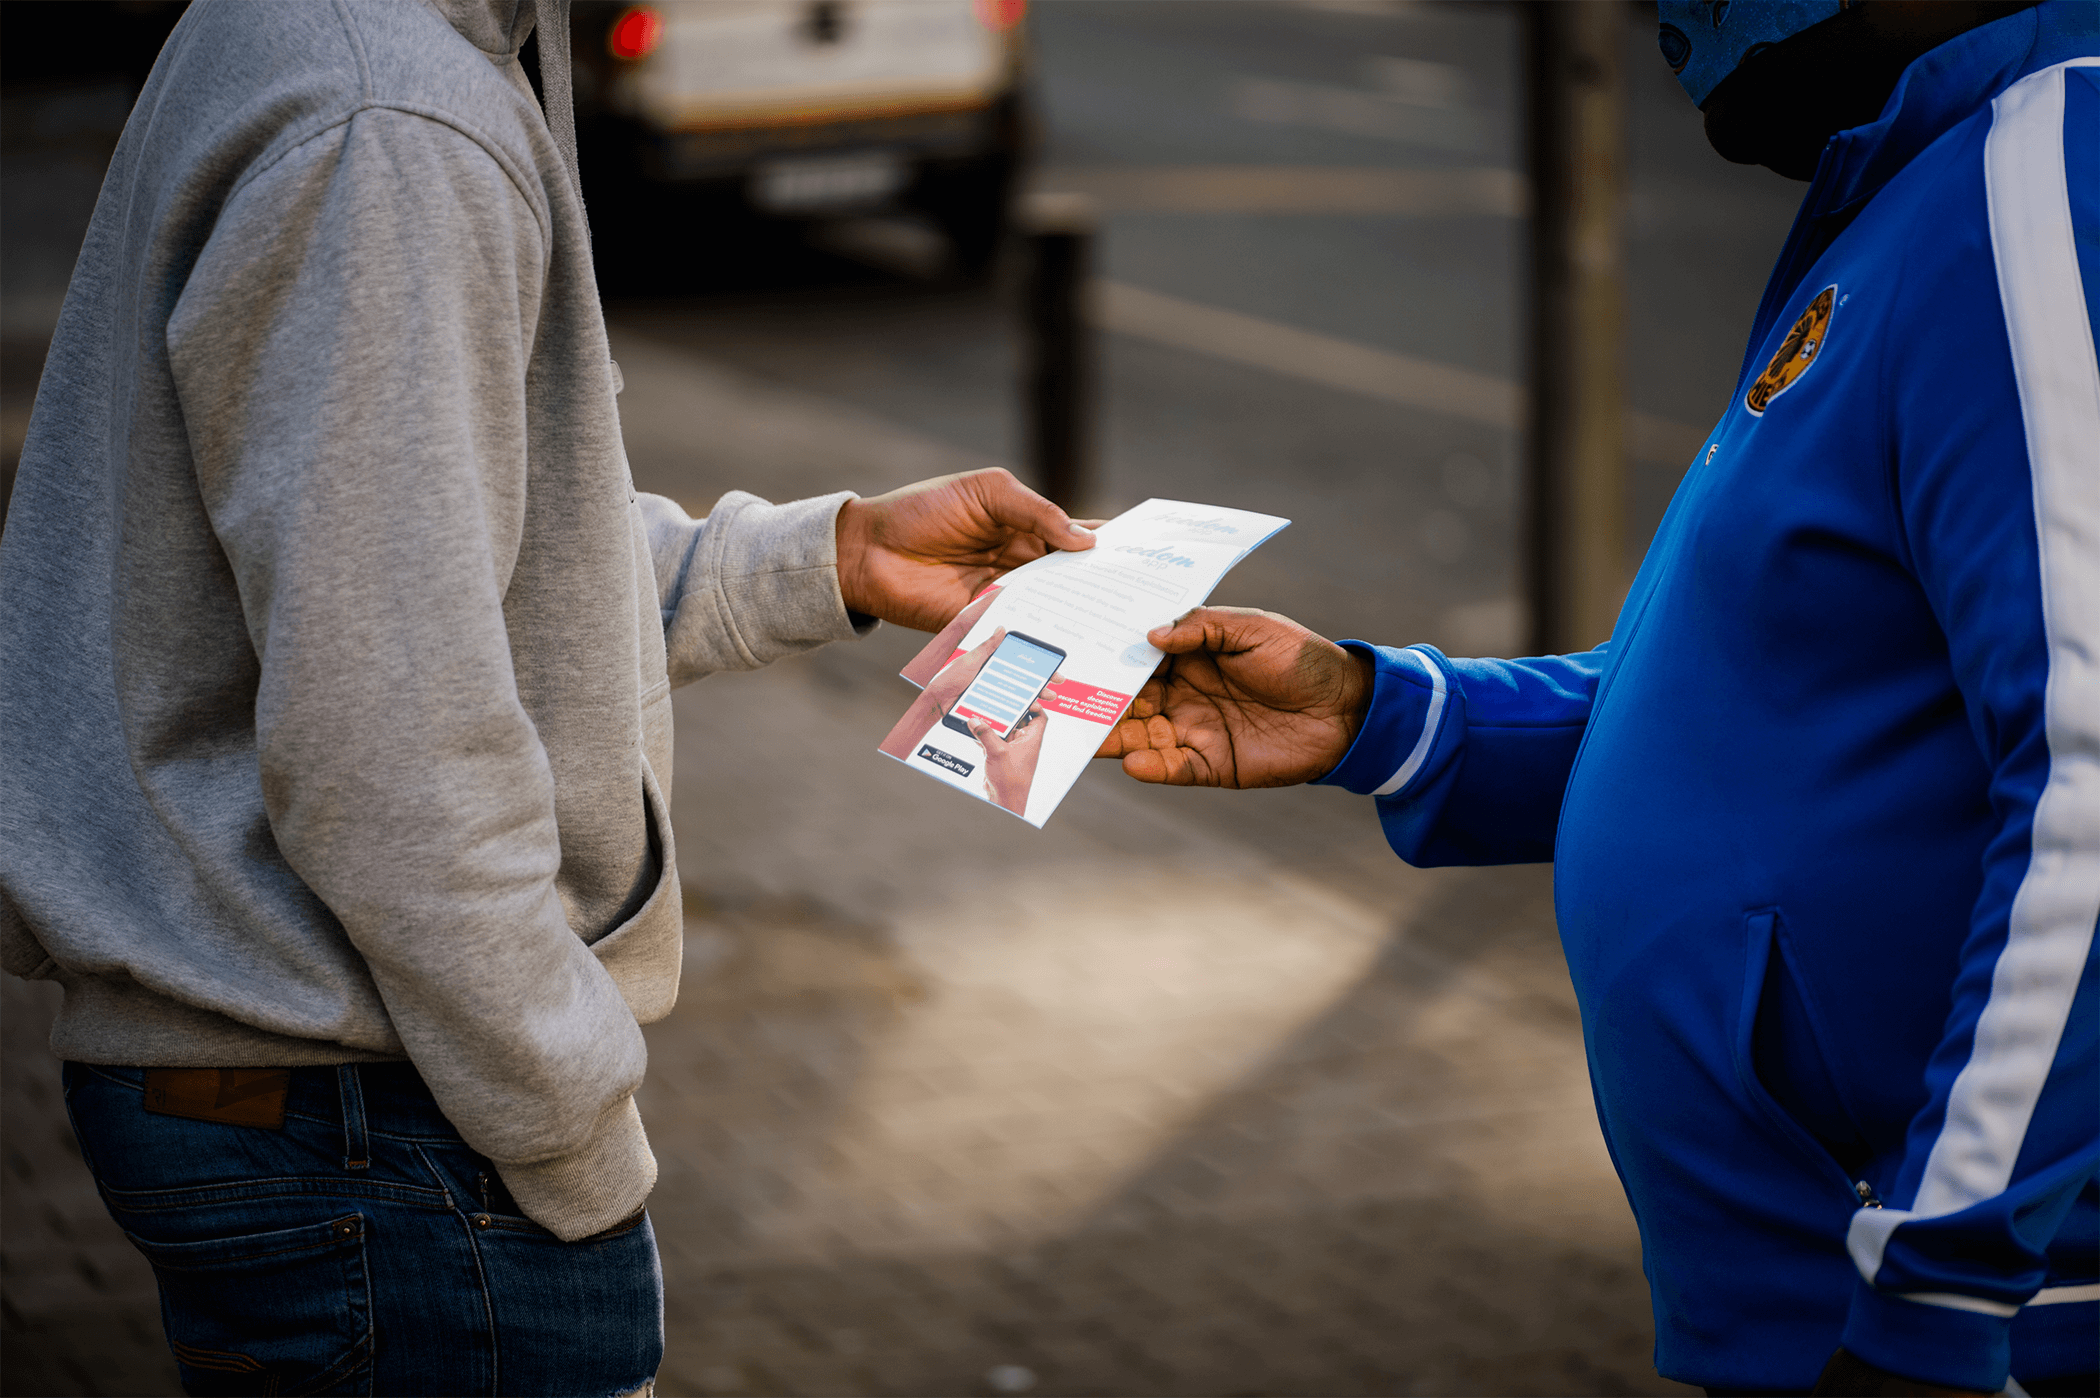 Man hands someone a brochure about human trafficking as part of the Freedom Project.